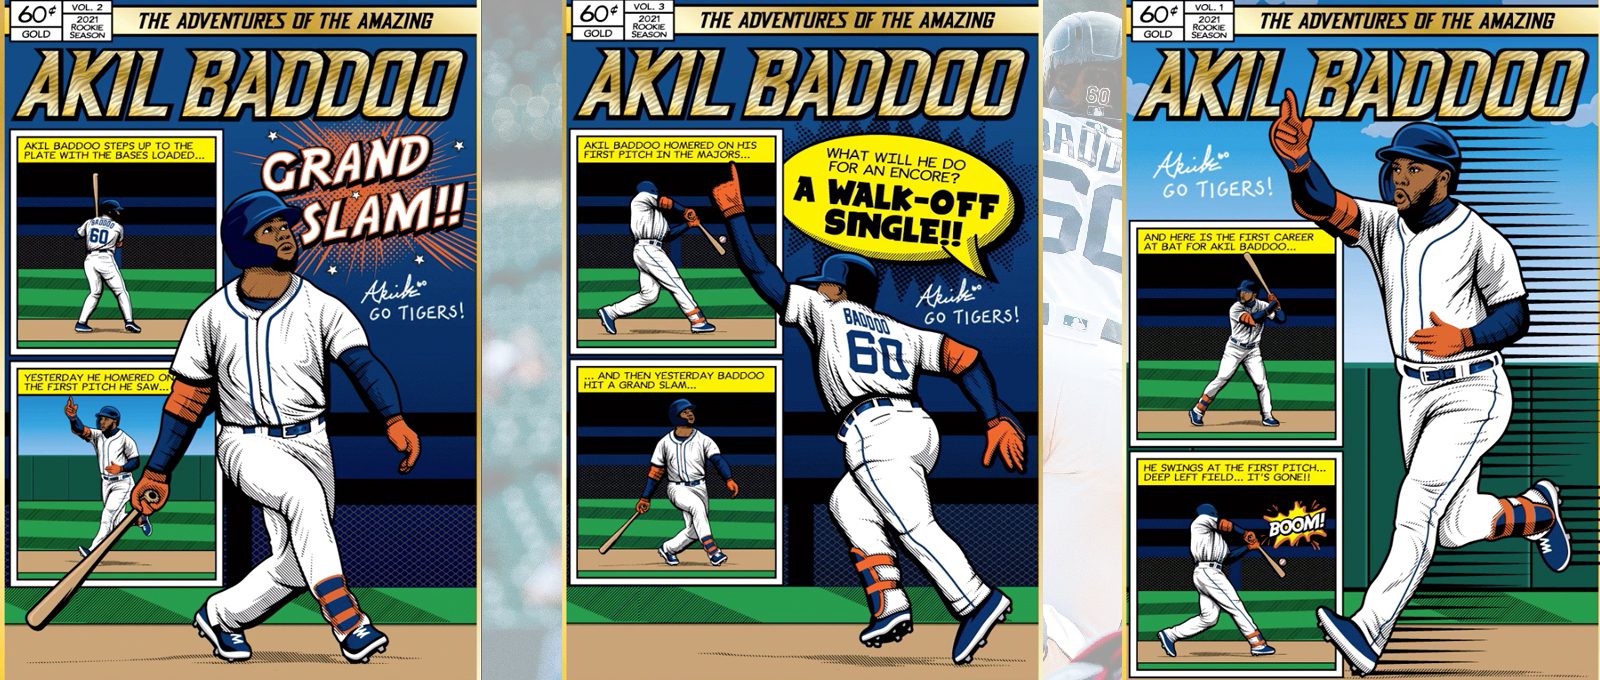 AMAZING STORY CONTINUES! Rookie Akil Baddoo hits walk-off